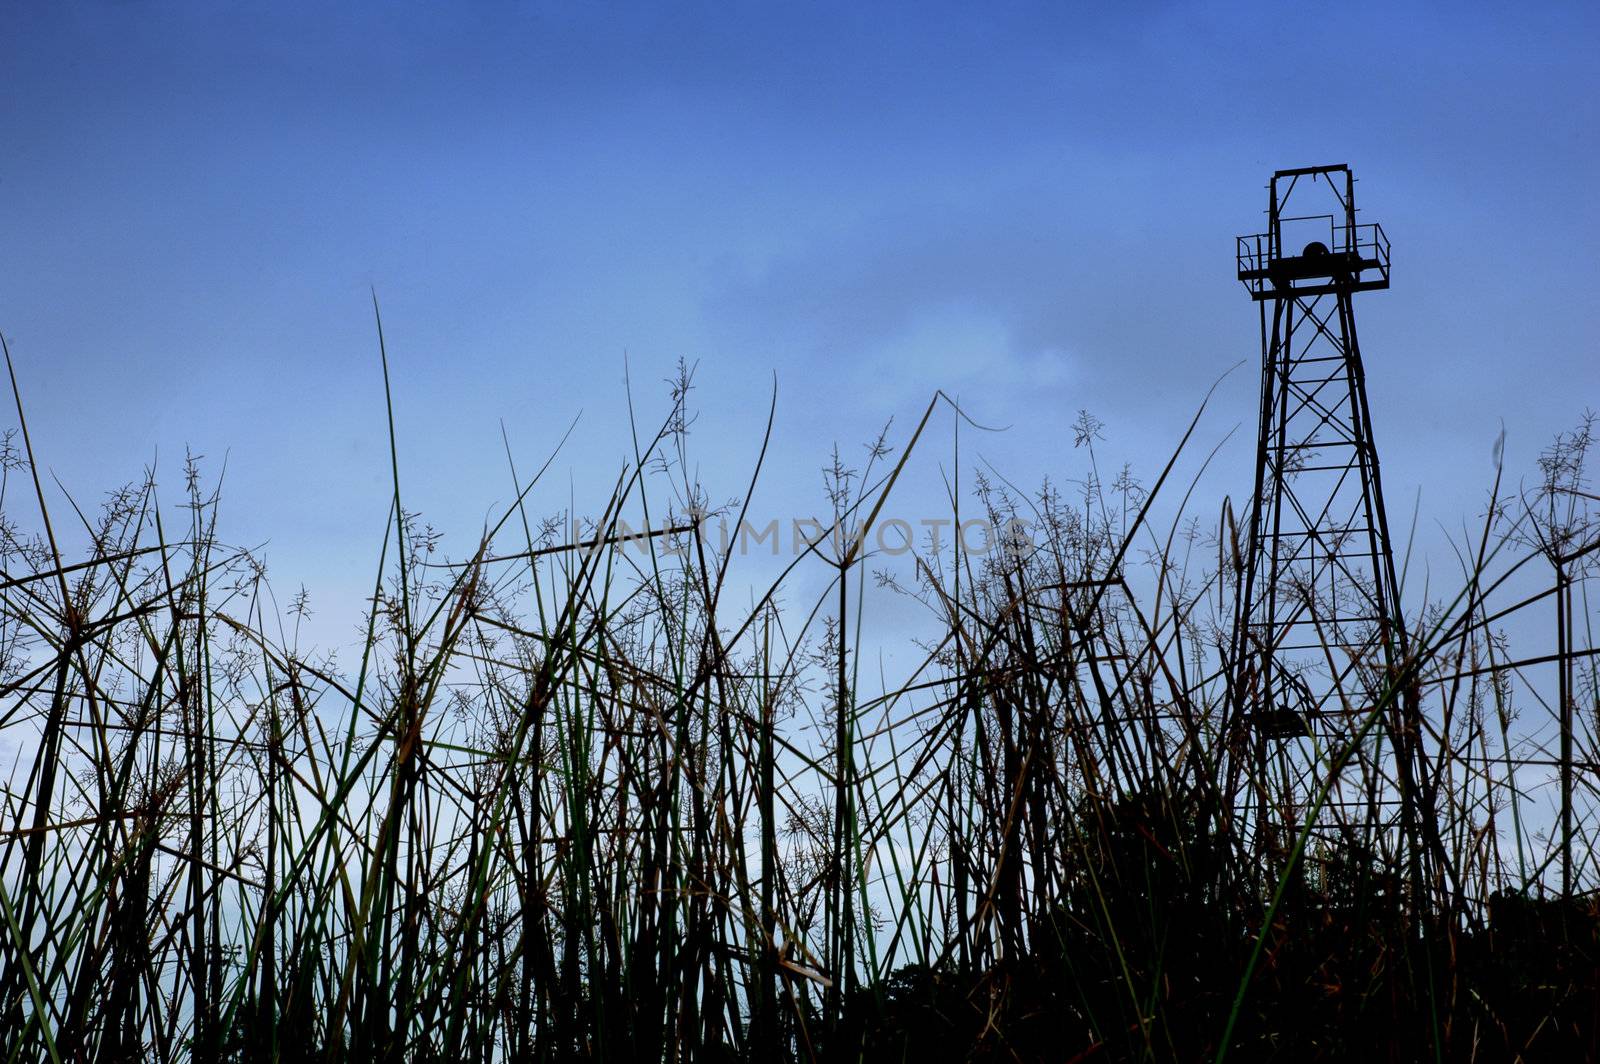 old oil tower and the foreground grass